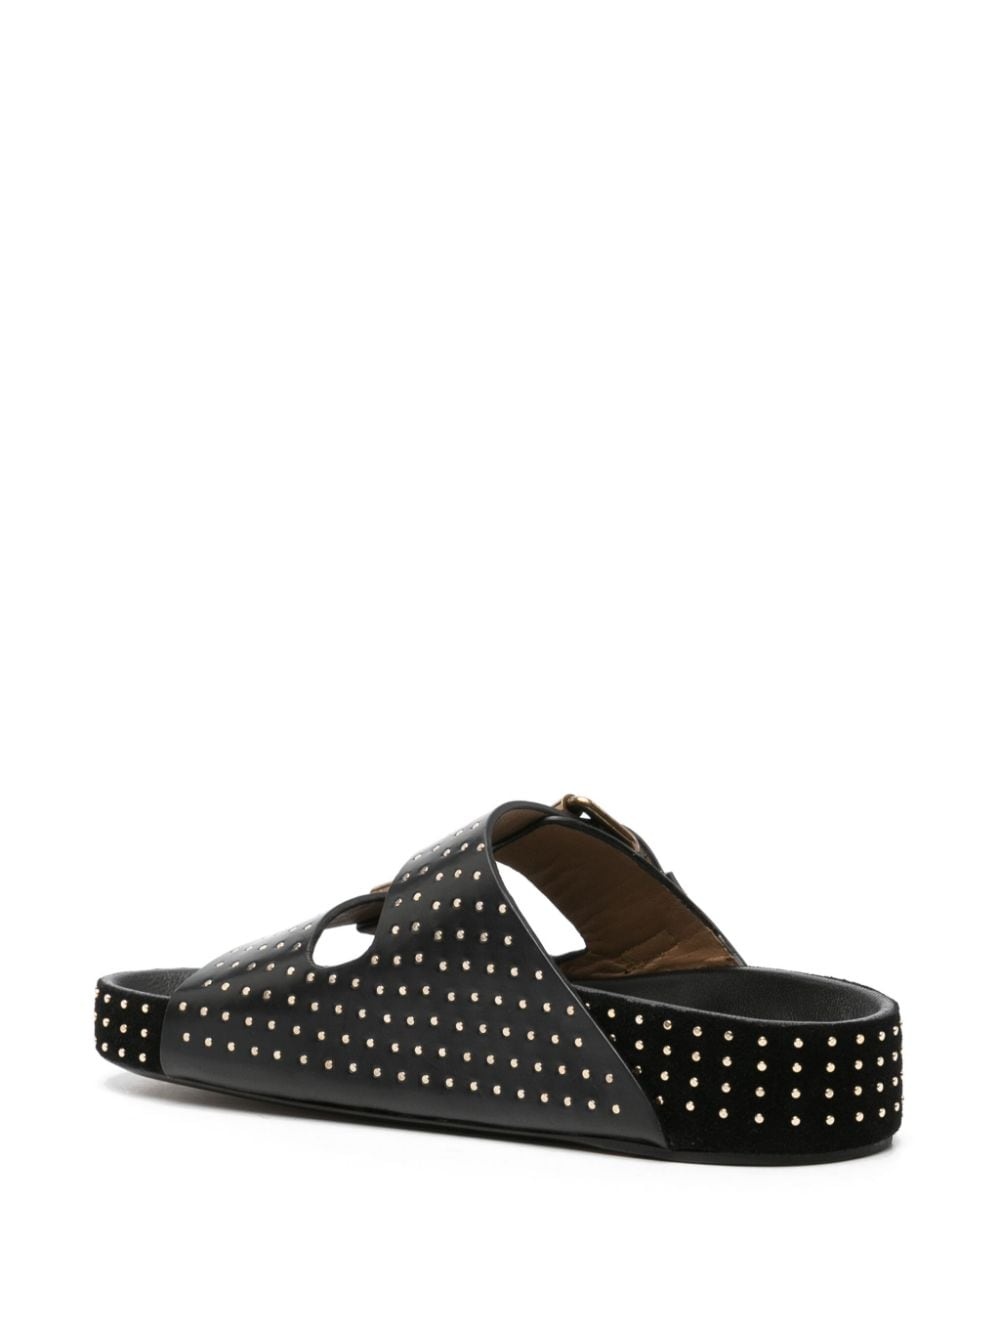 studded leather sandals - 3